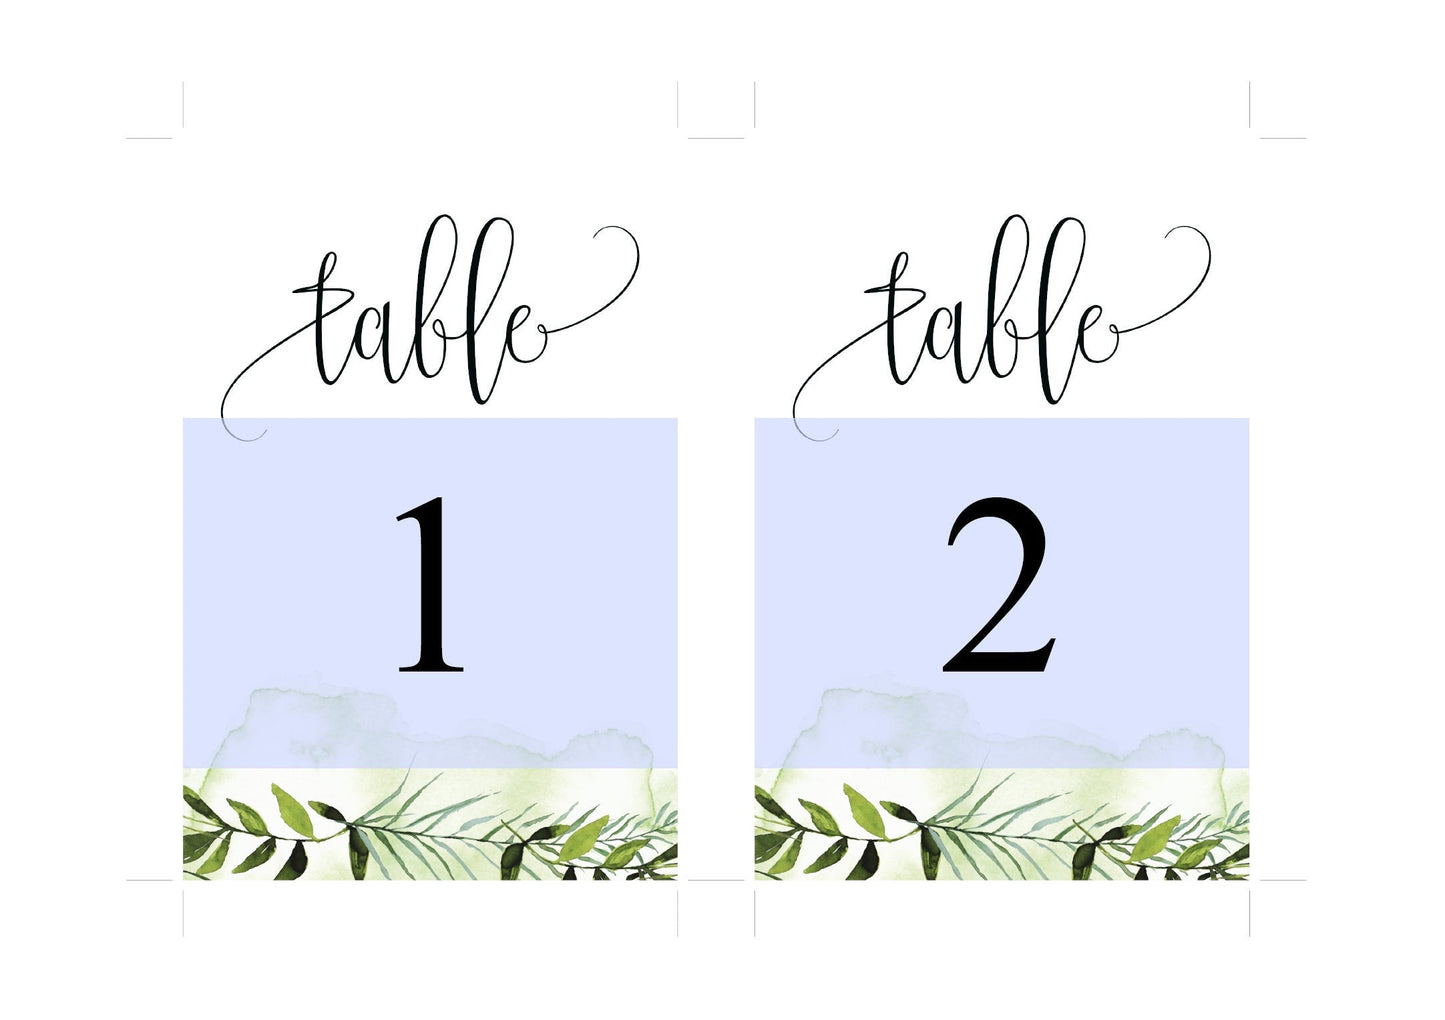 Simple Wedding Table Number, Wedding Table, Printable Numbers, Instant Download, DIY Table Numbers, Cards, Greenery, Rustic  - Melissa TABLE NUMBERS SAVVY PAPER CO